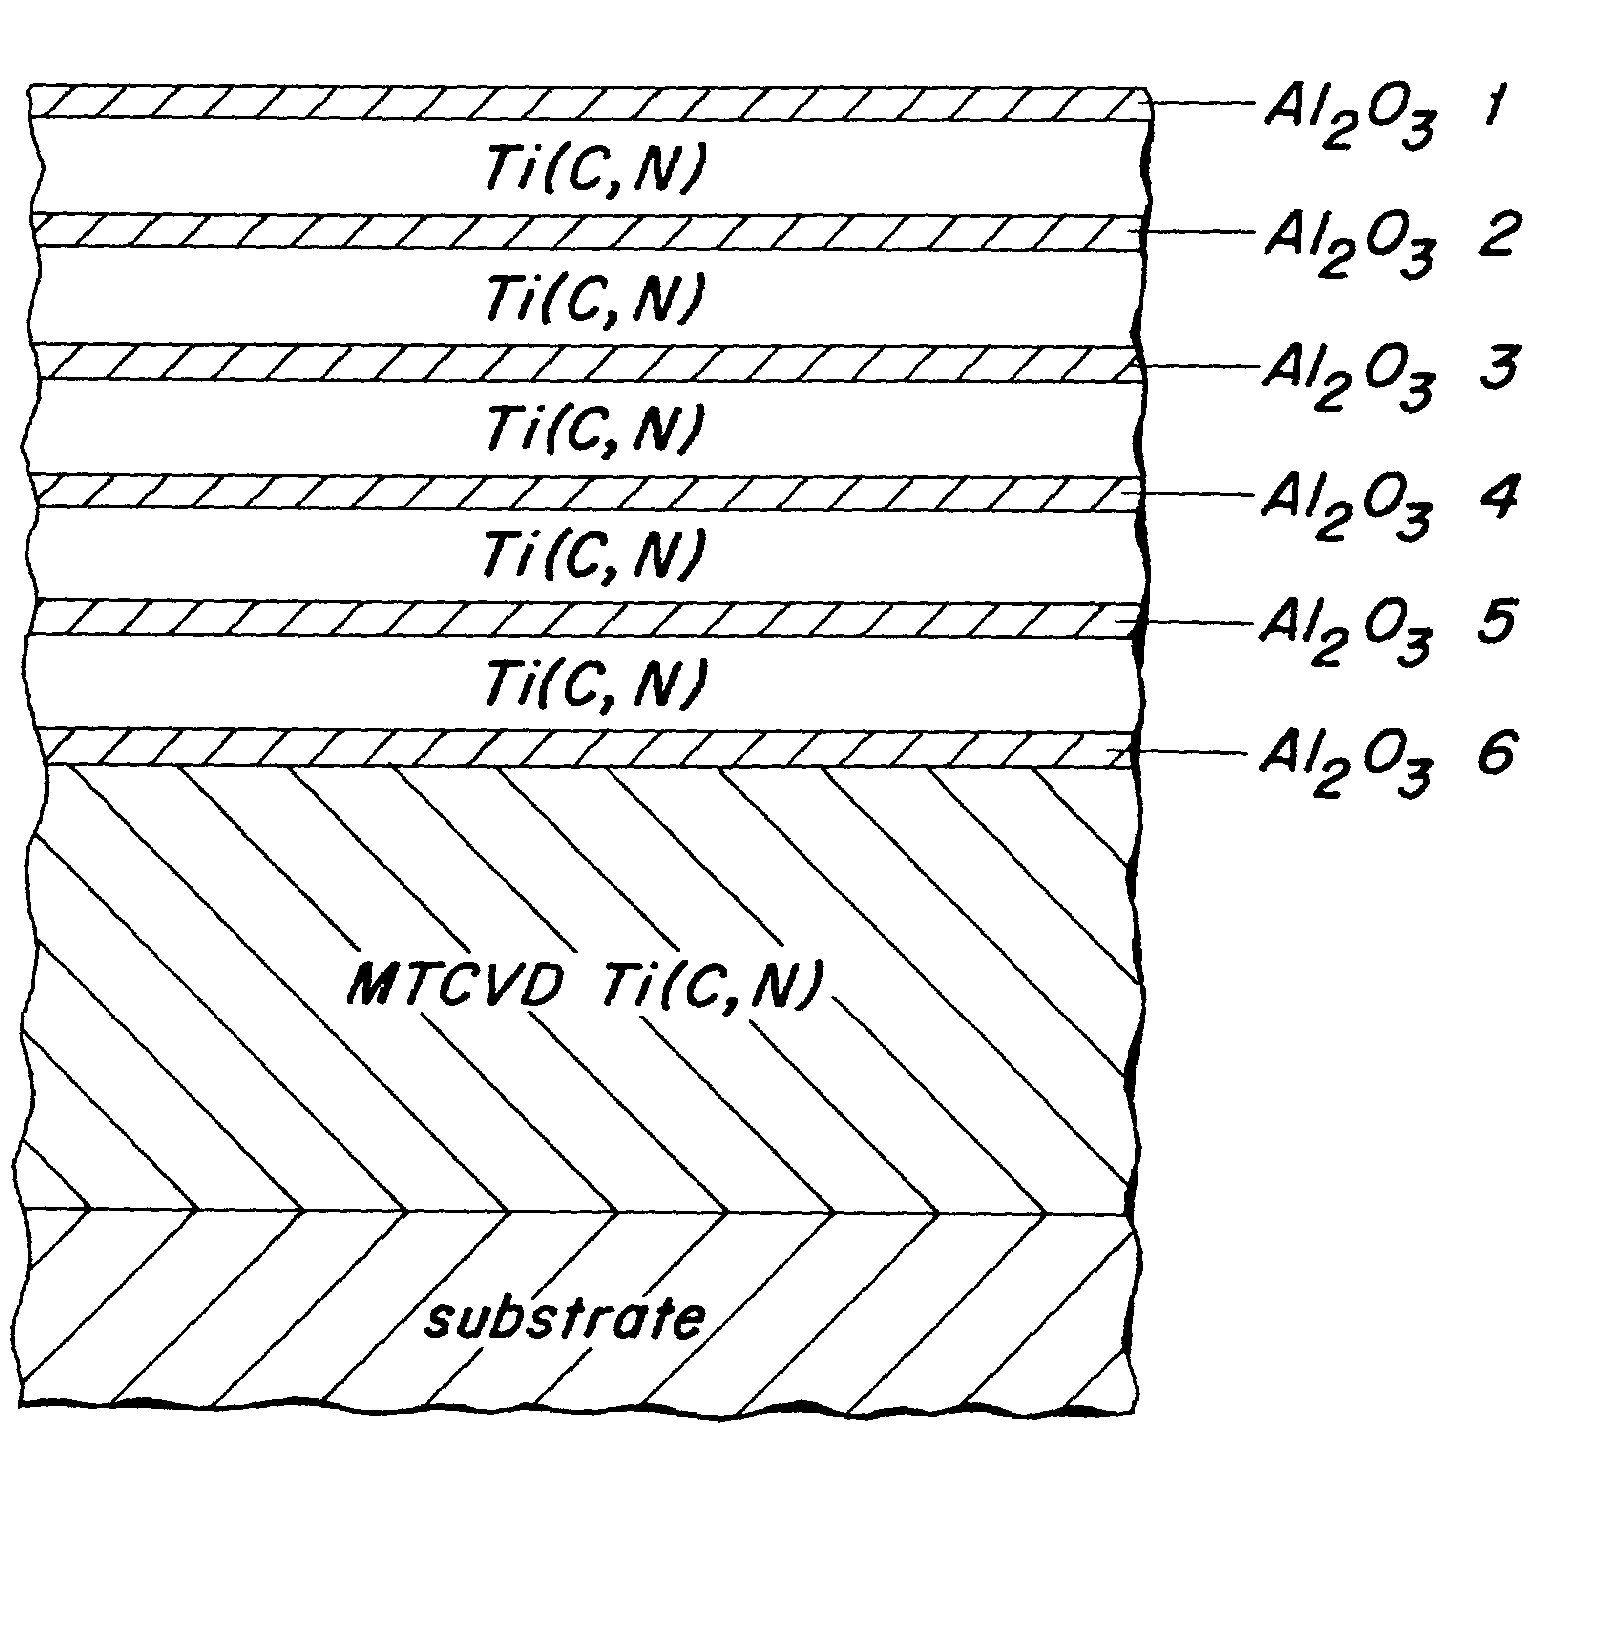 Enhanced A12O3-Ti(C,N) multi-coating deposited at low temperature